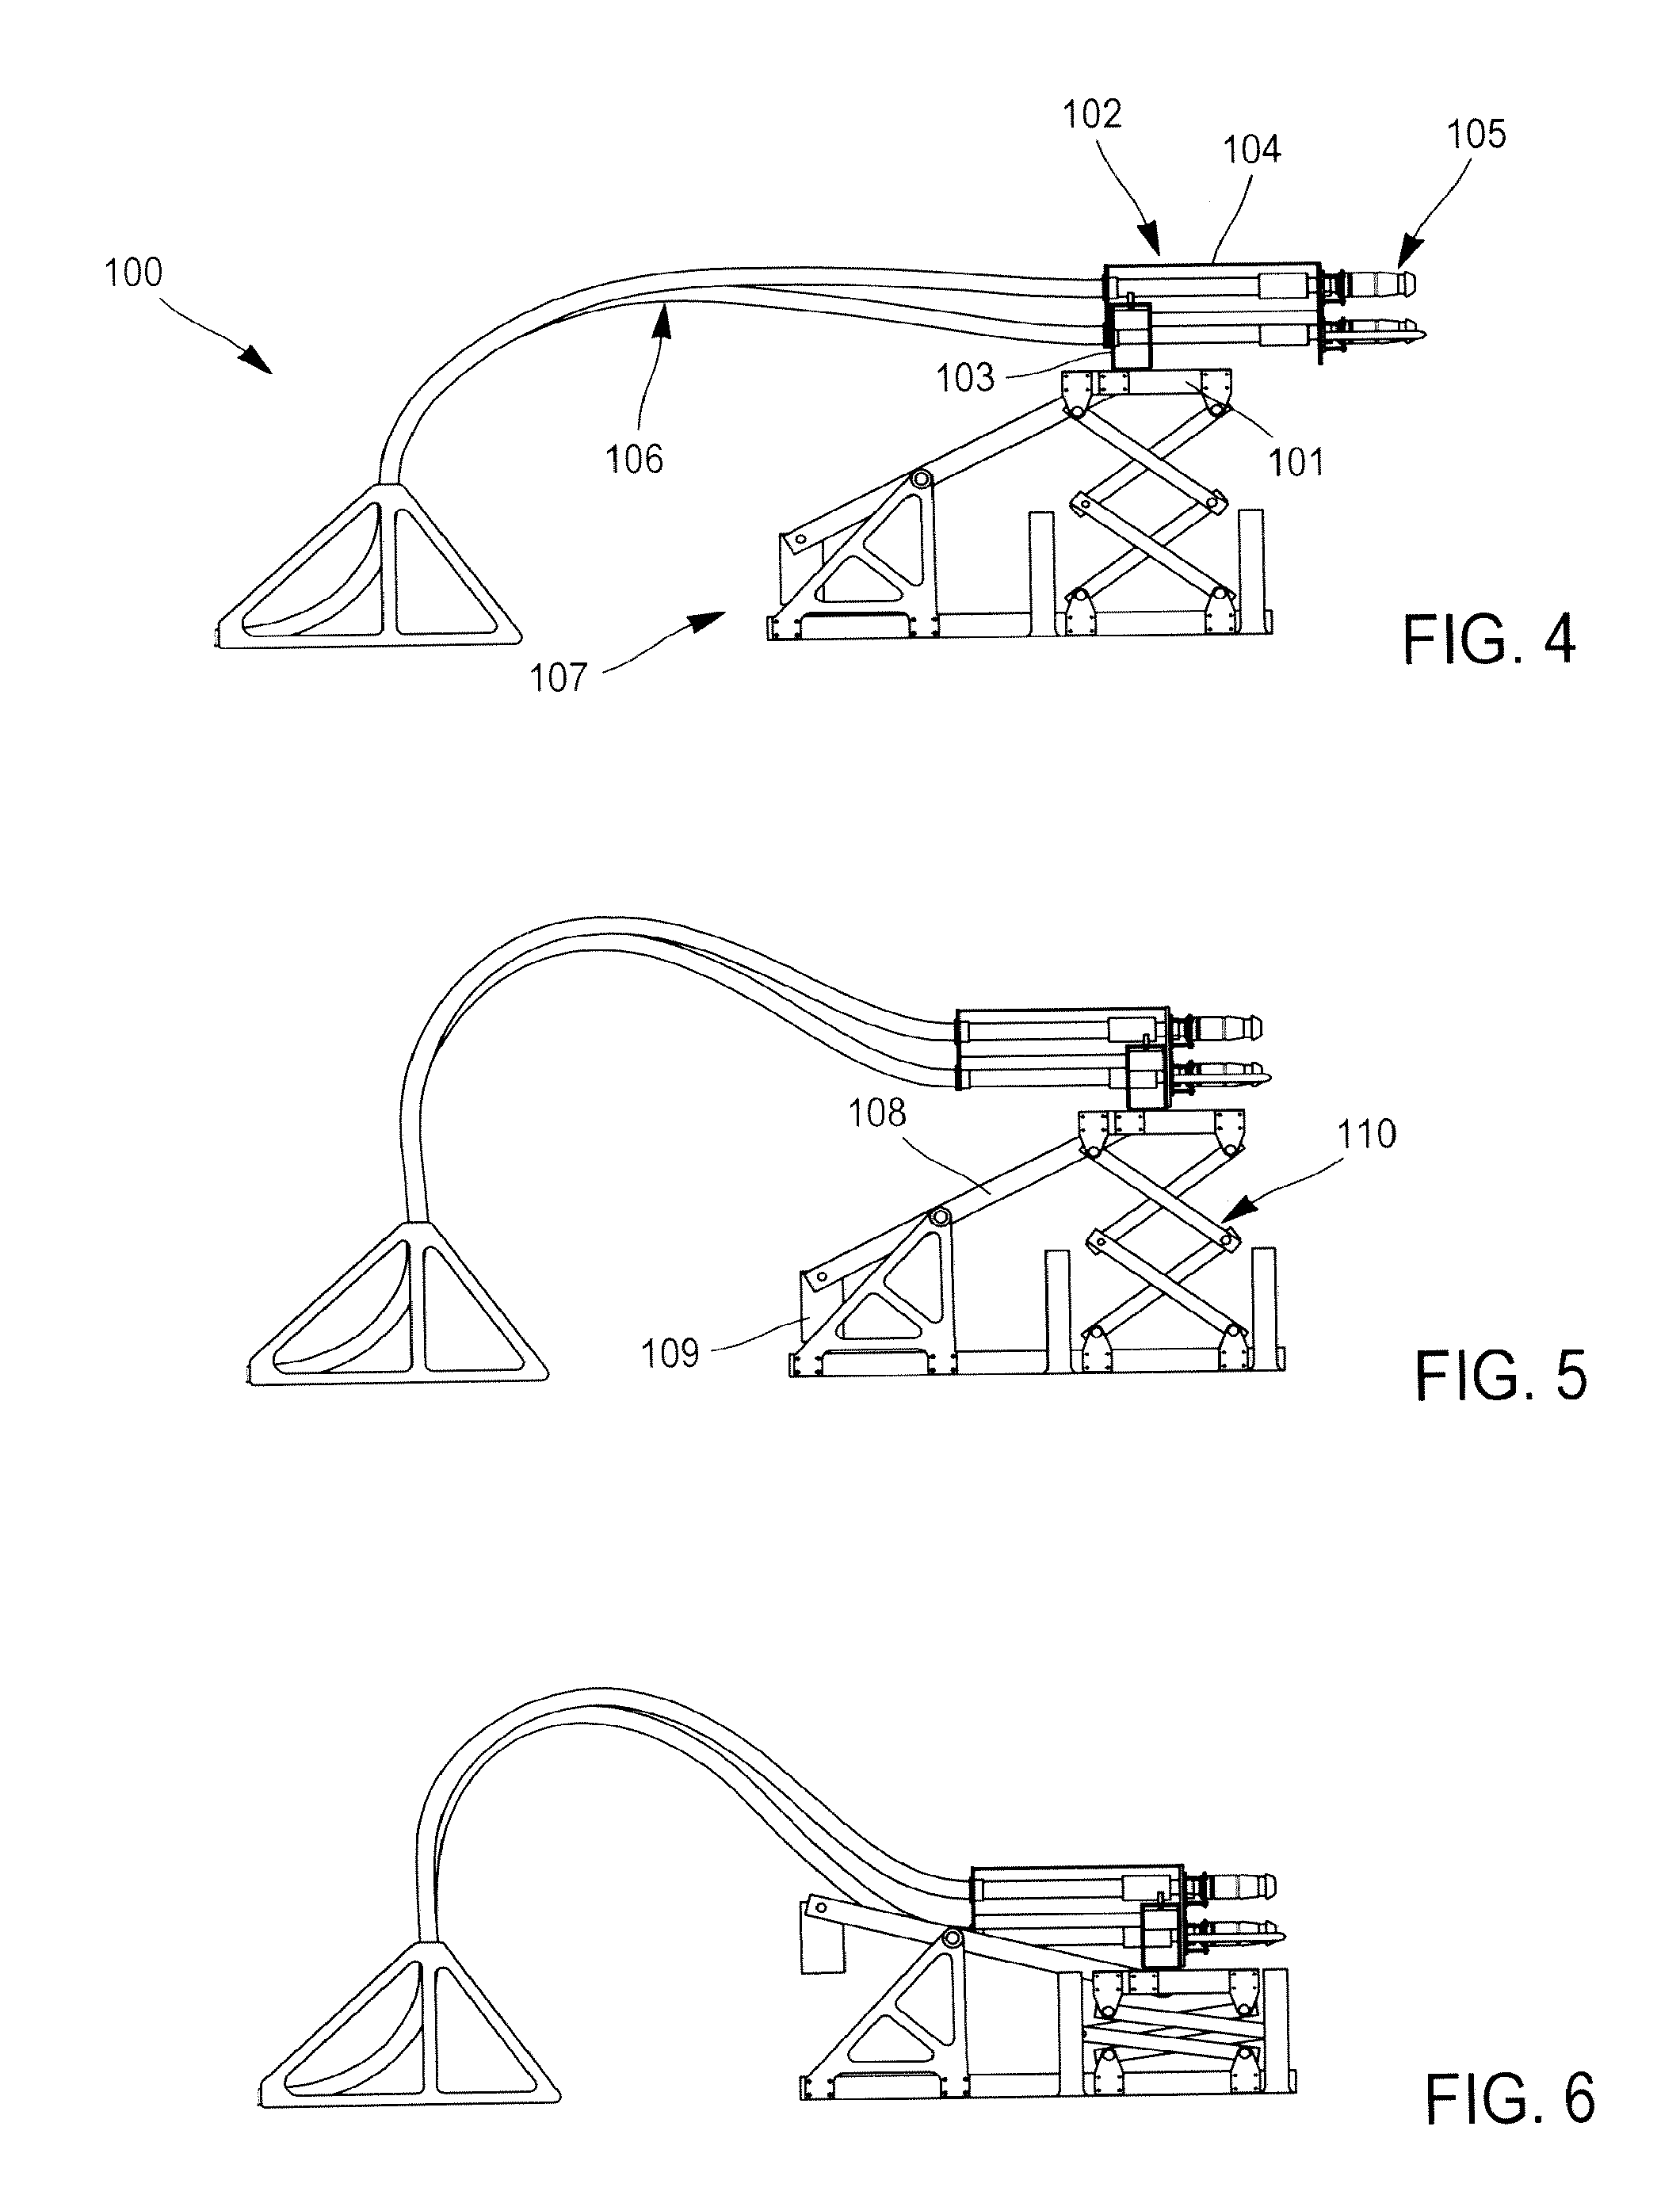 Method for locating an electrical defect in an underwater electrical distribution modular system